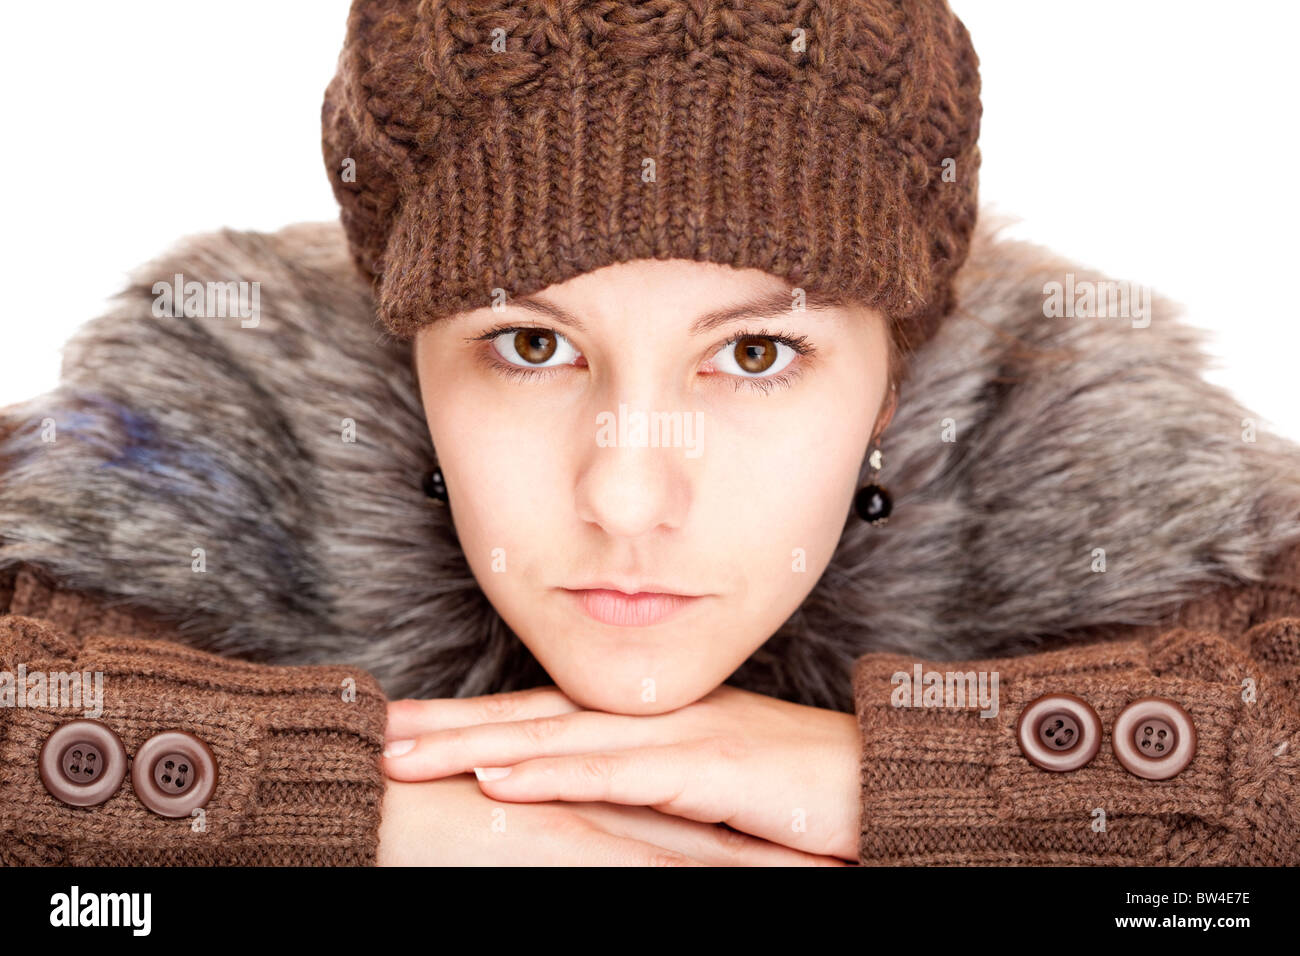 Beautiful young woman with pullover and cap looks serious. Isolated on white background. Stock Photo